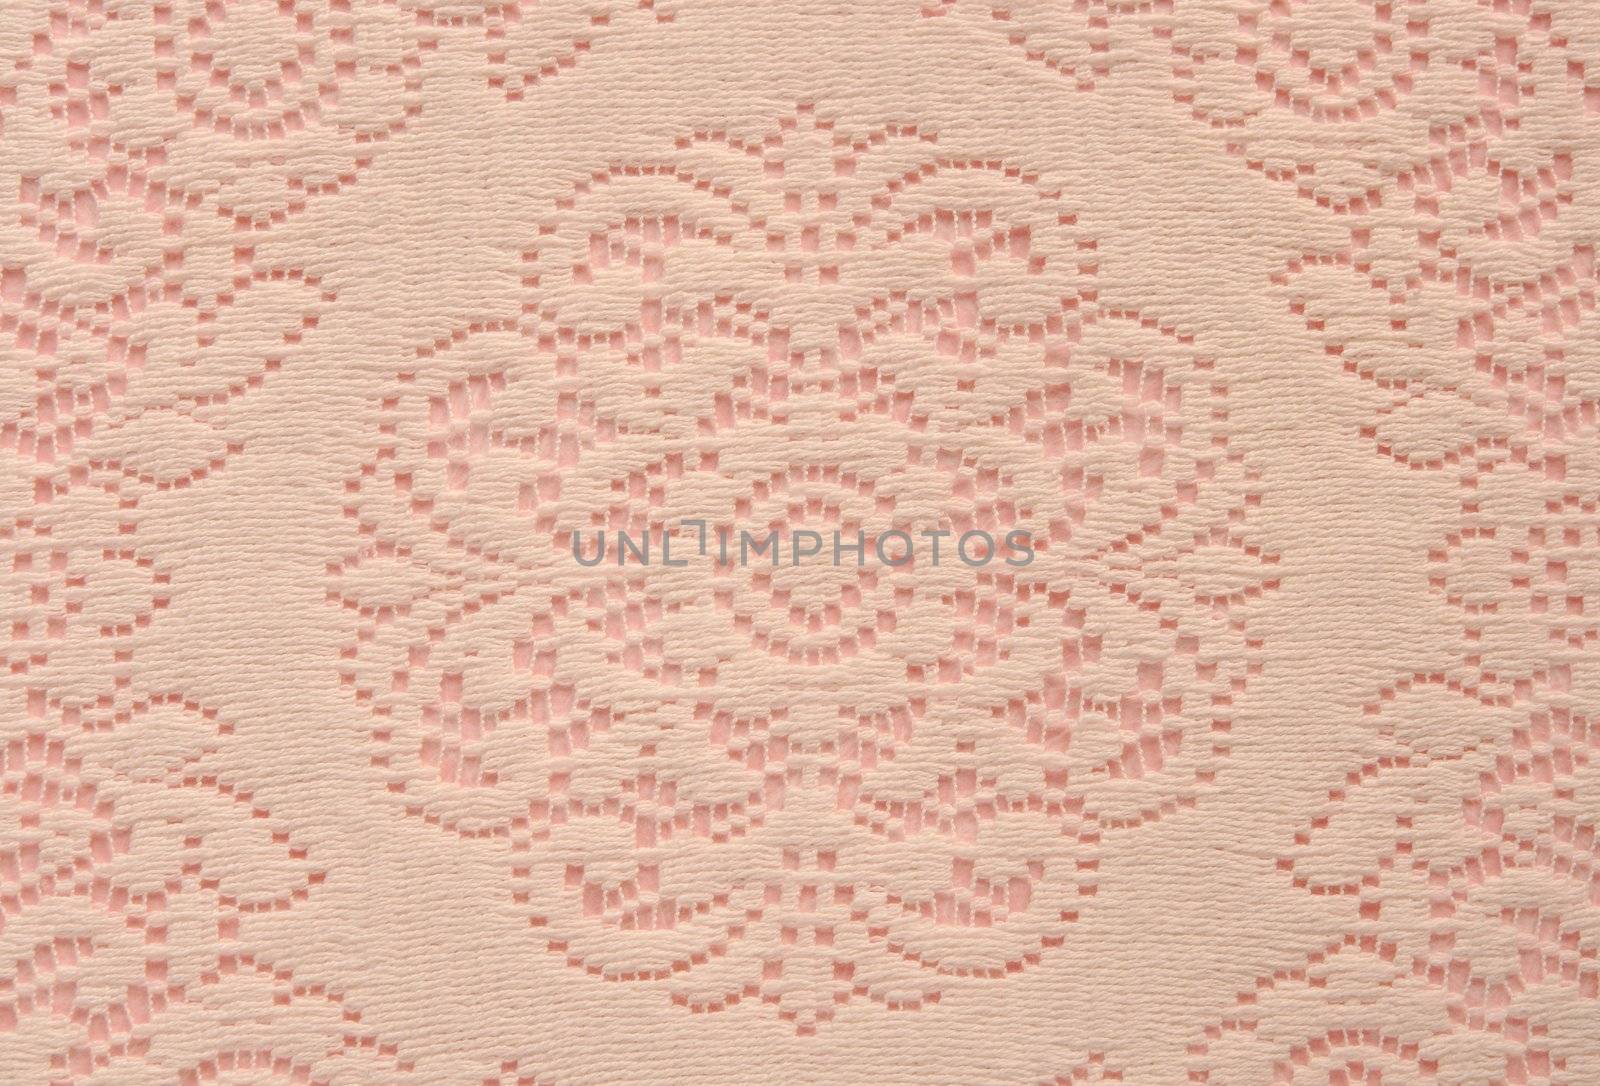 beige lace doily on pink useful for a background